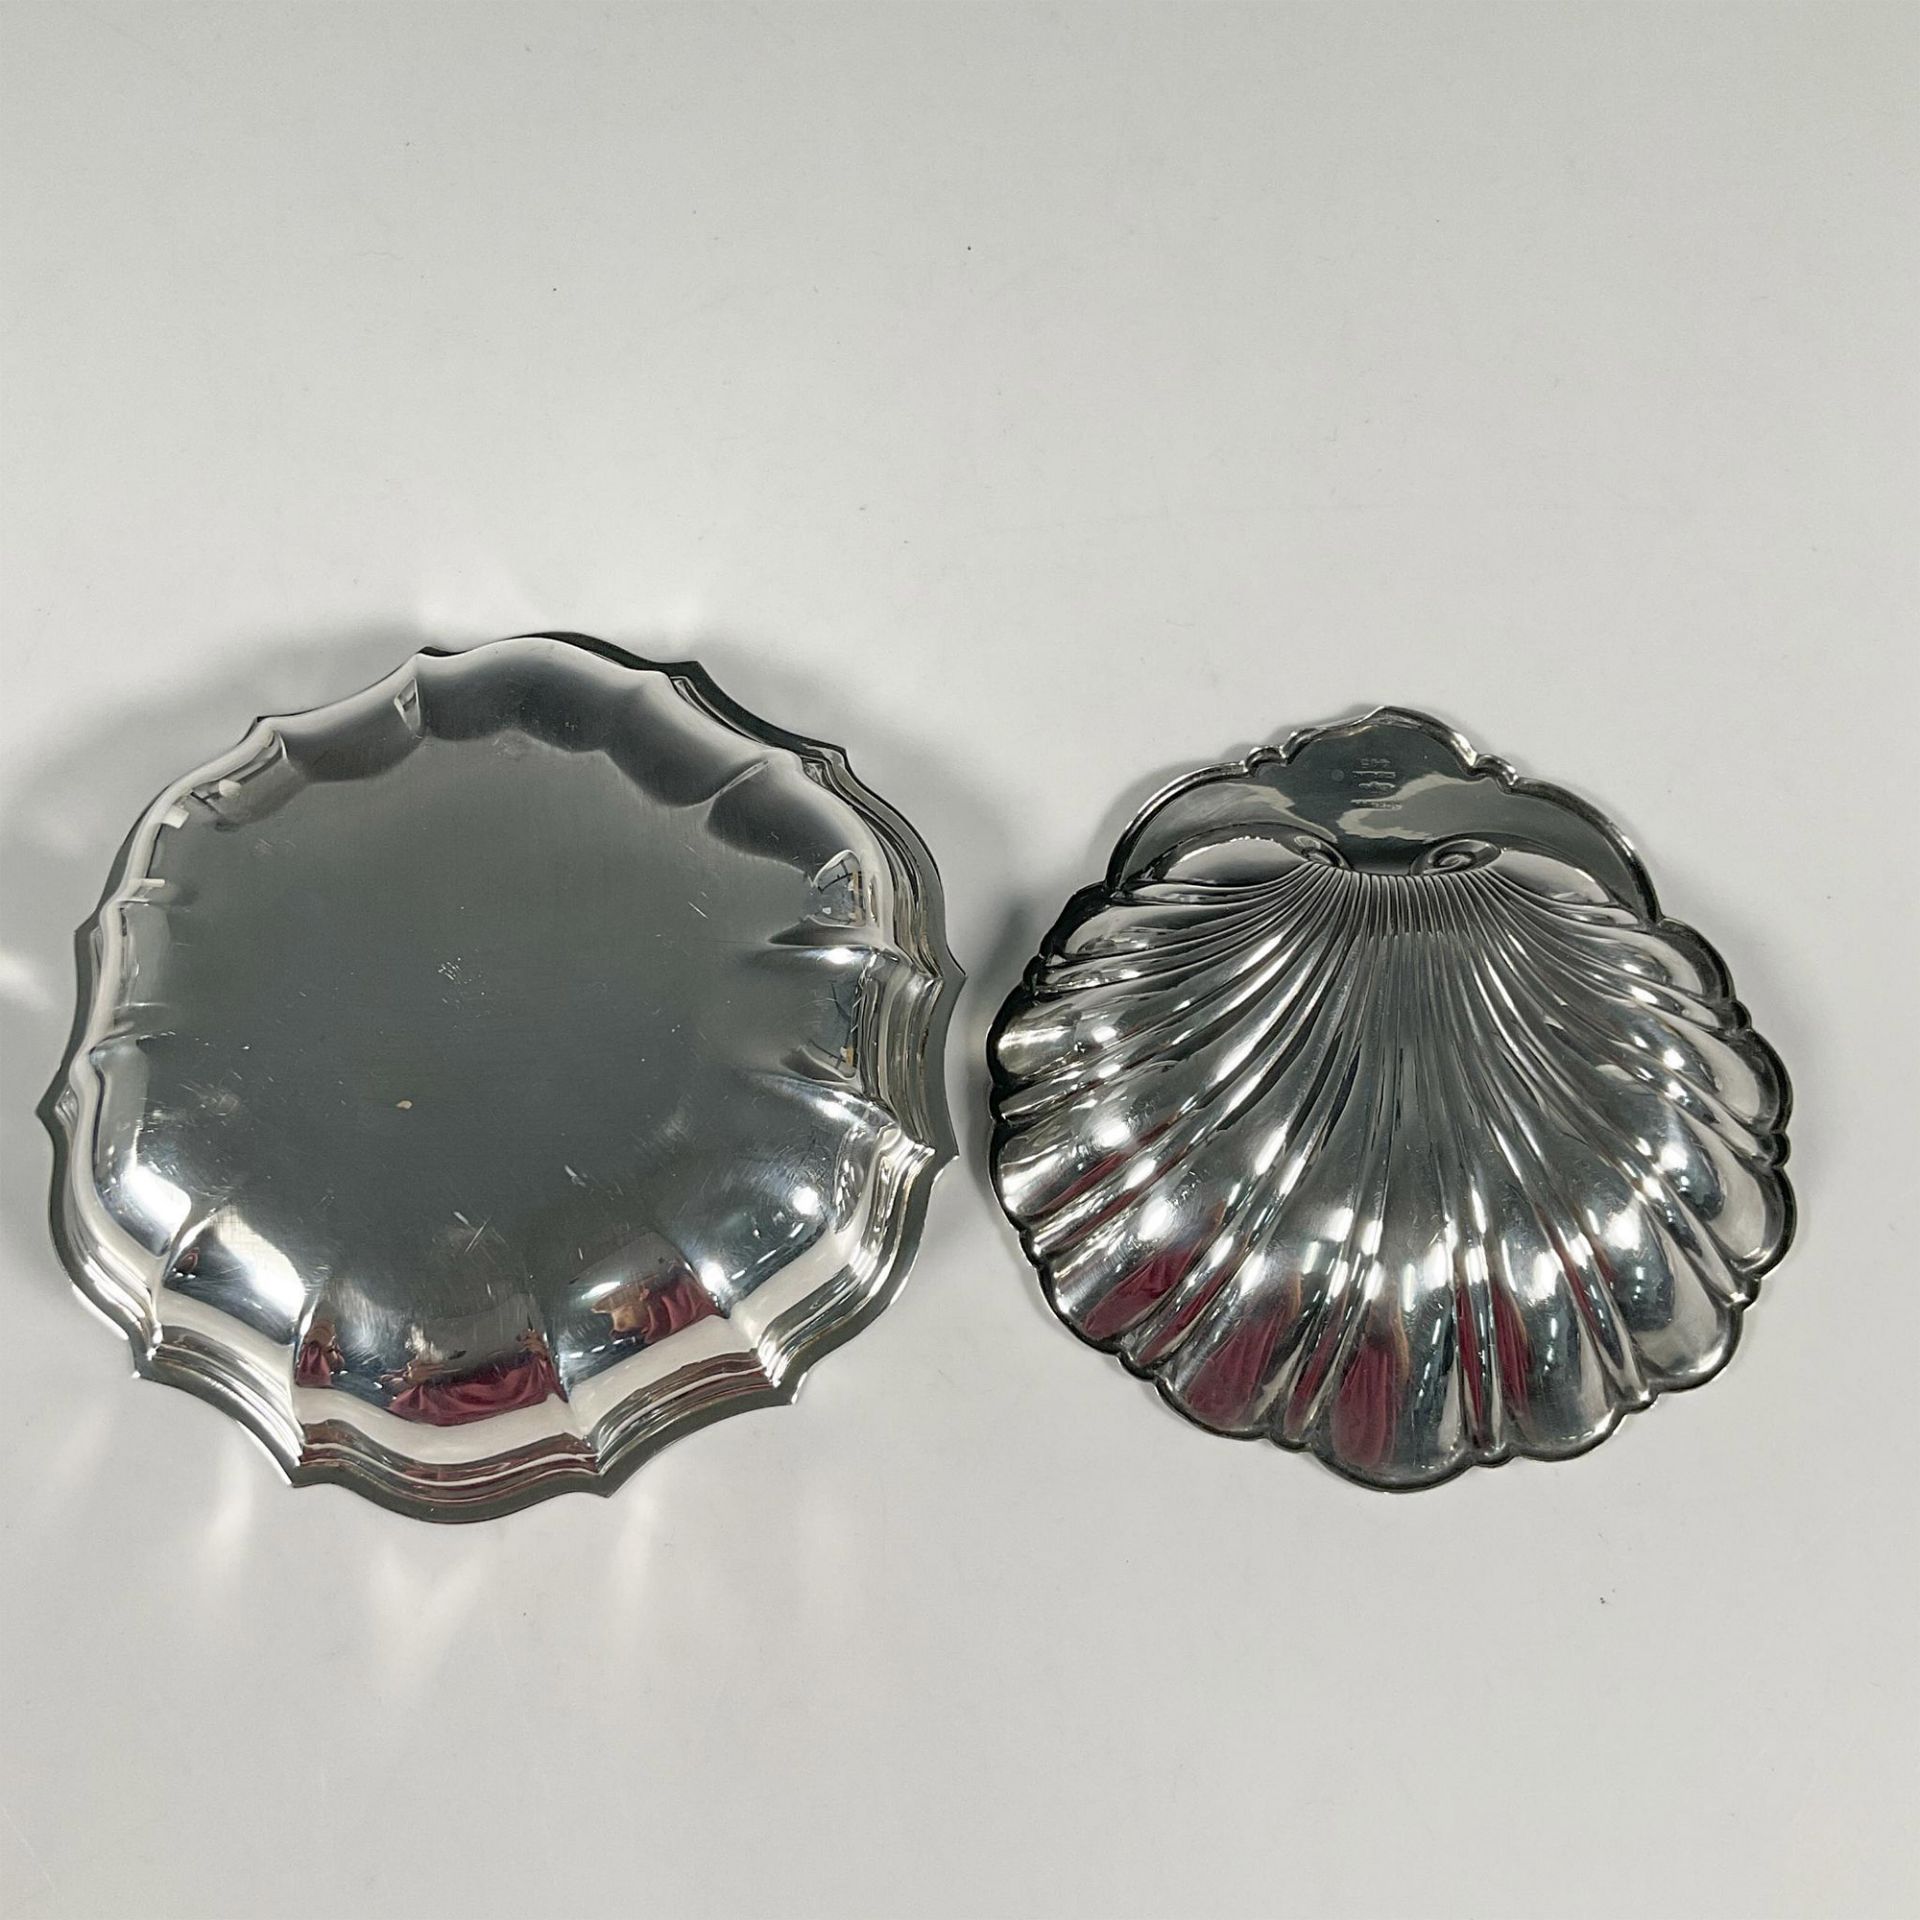 Gorham, and Chippendale Sterling Silver Bowls - Image 3 of 4